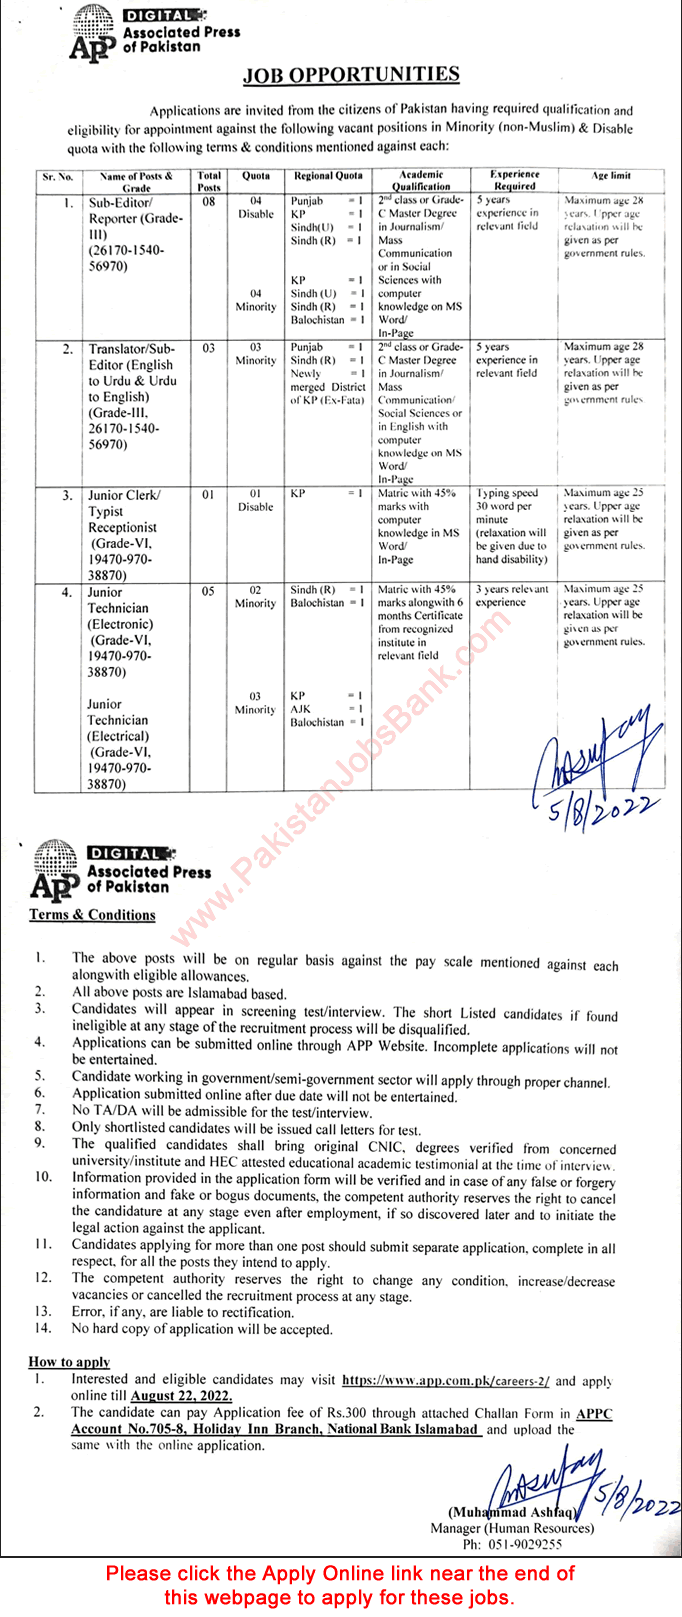 Associated Press of Pakistan Corporation Jobs 2022 August APP Apply Online Sub Editors, Reporters & Others Latest